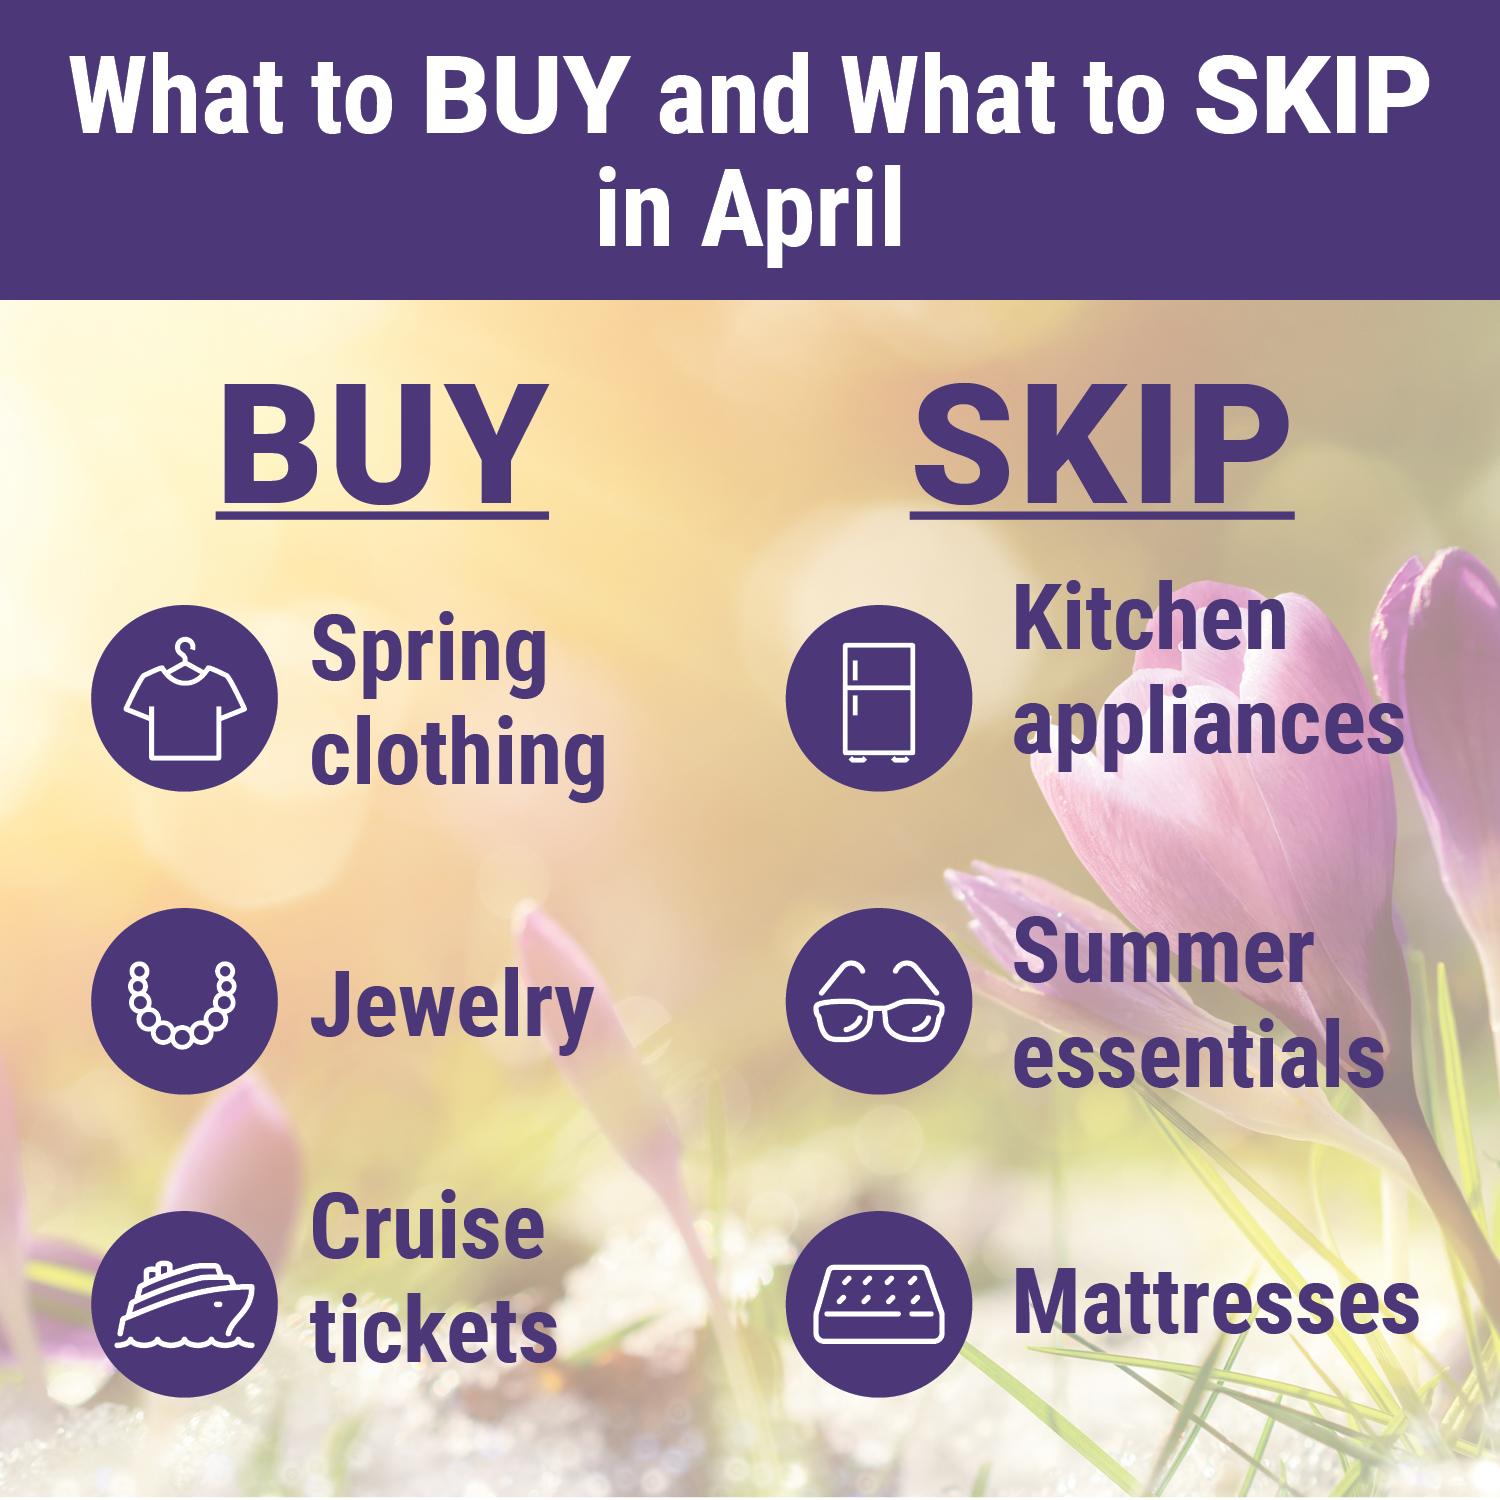 What to Buy and What to Skip in April